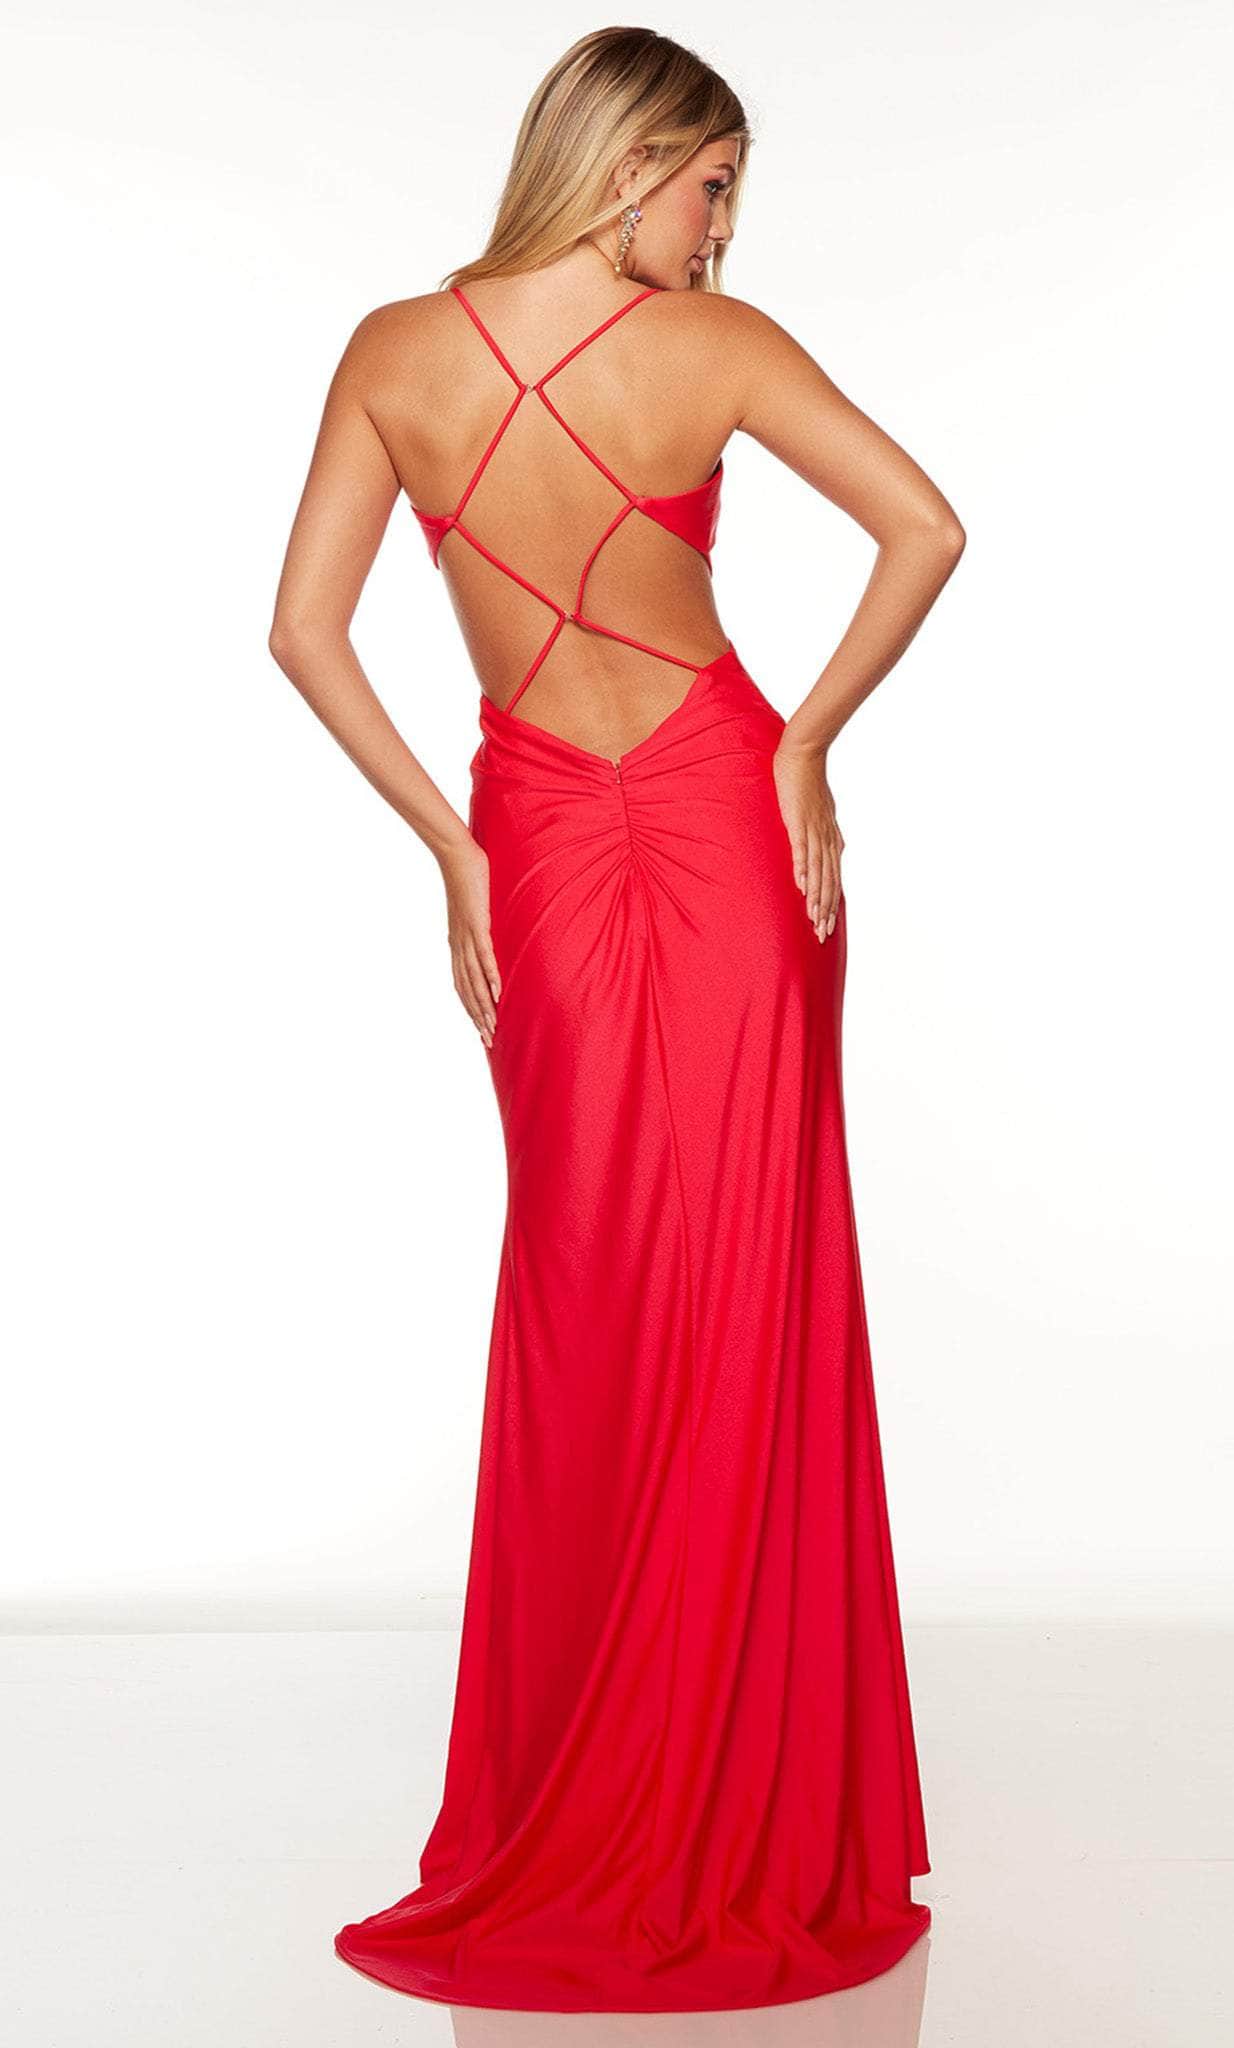 Alyce Paris 61444 - Strappy Back Dress Special Occasion Dress